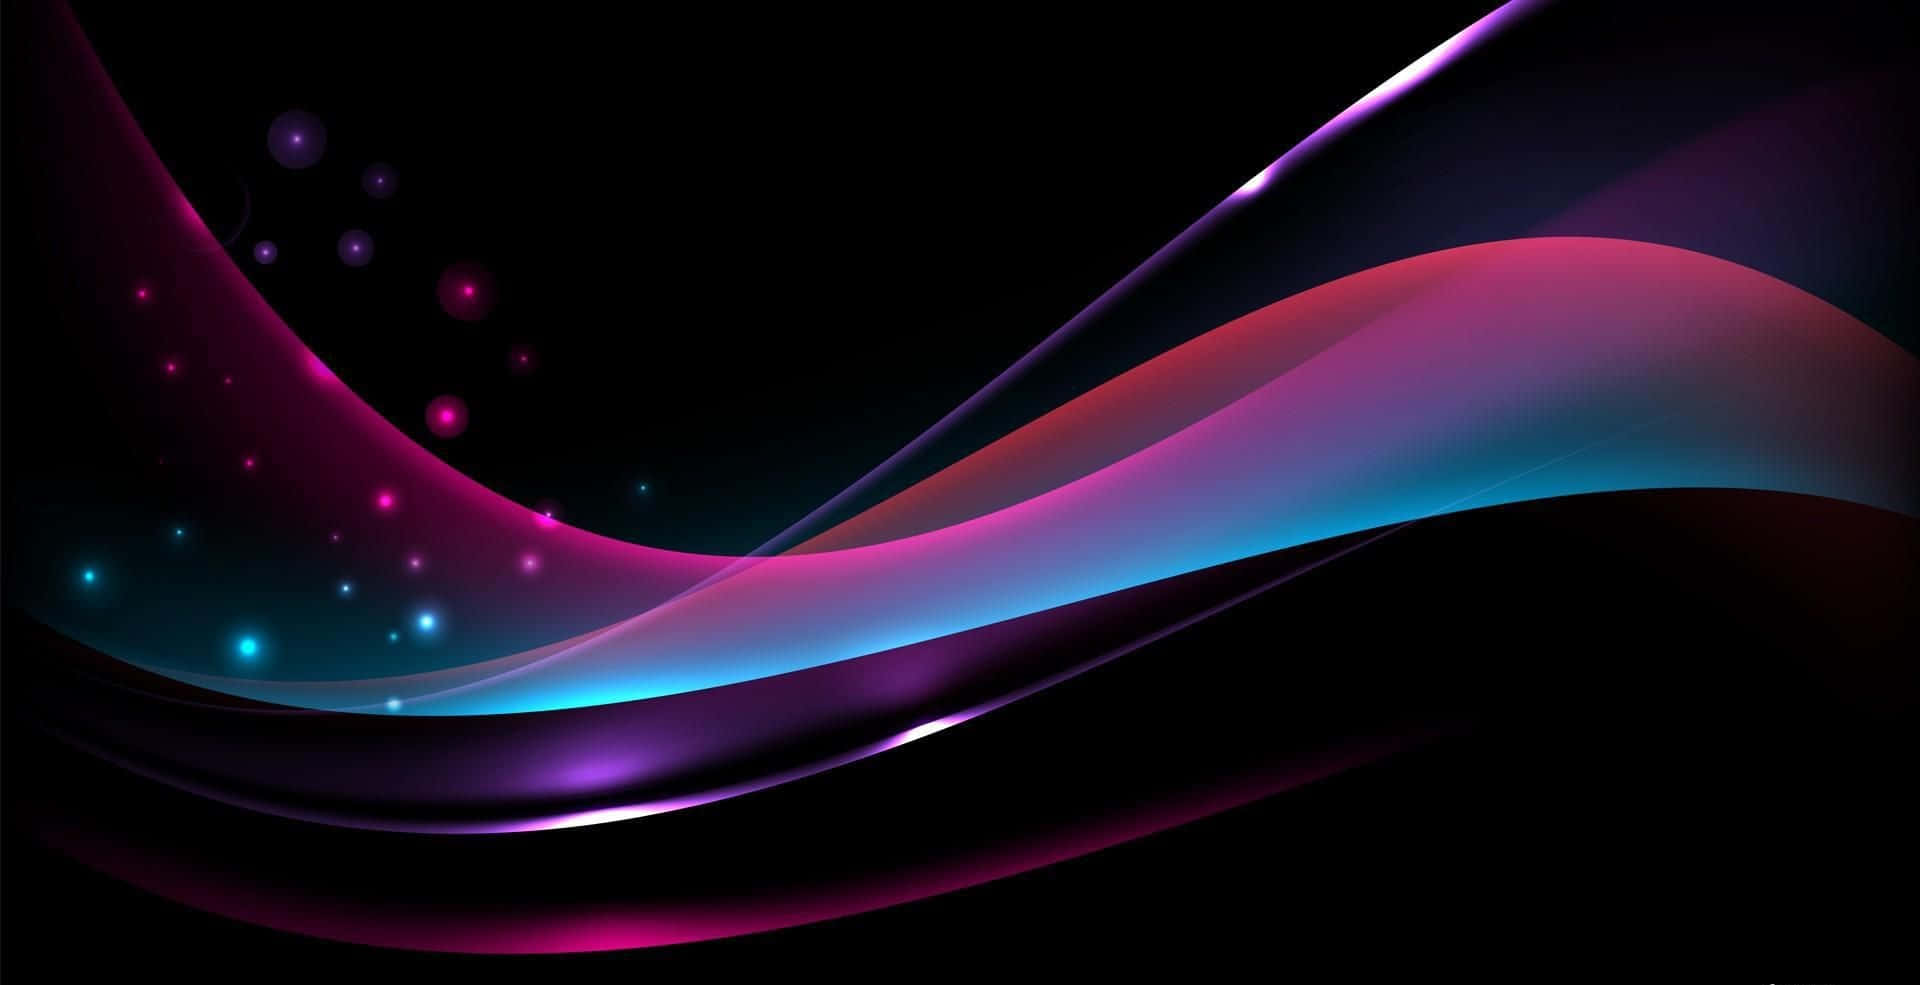 Abstract Shiny Waves Background